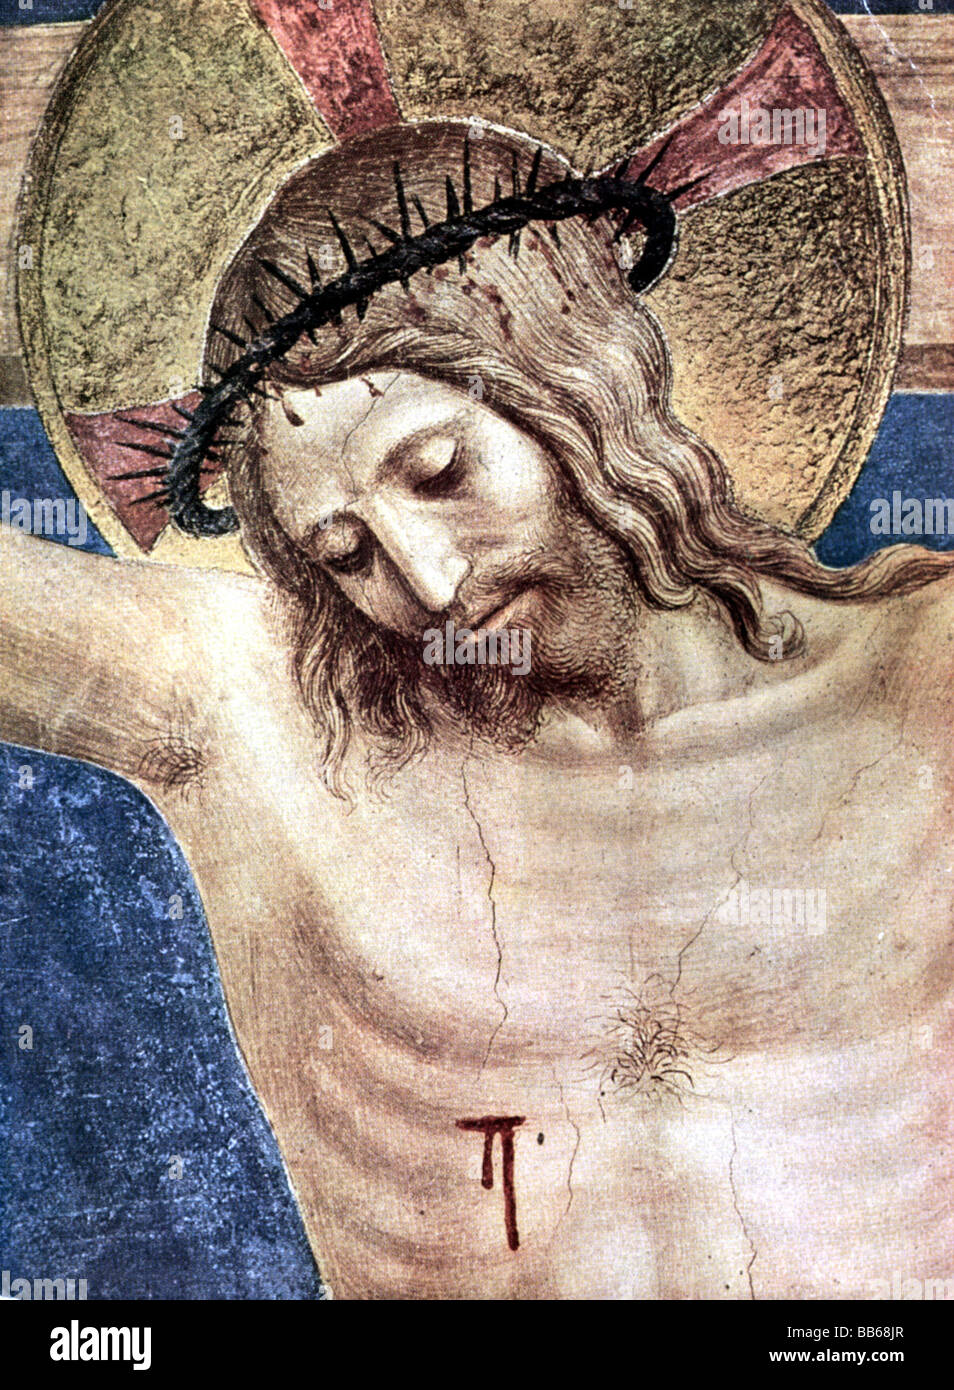 Jesus Christ, circa 4 BC - circa 33 BC, portrait, painting by Fra Angelico 'Crucified Christ and Saint Dominic', detail, Florence, San Marco monastery, Florence, Stock Photo